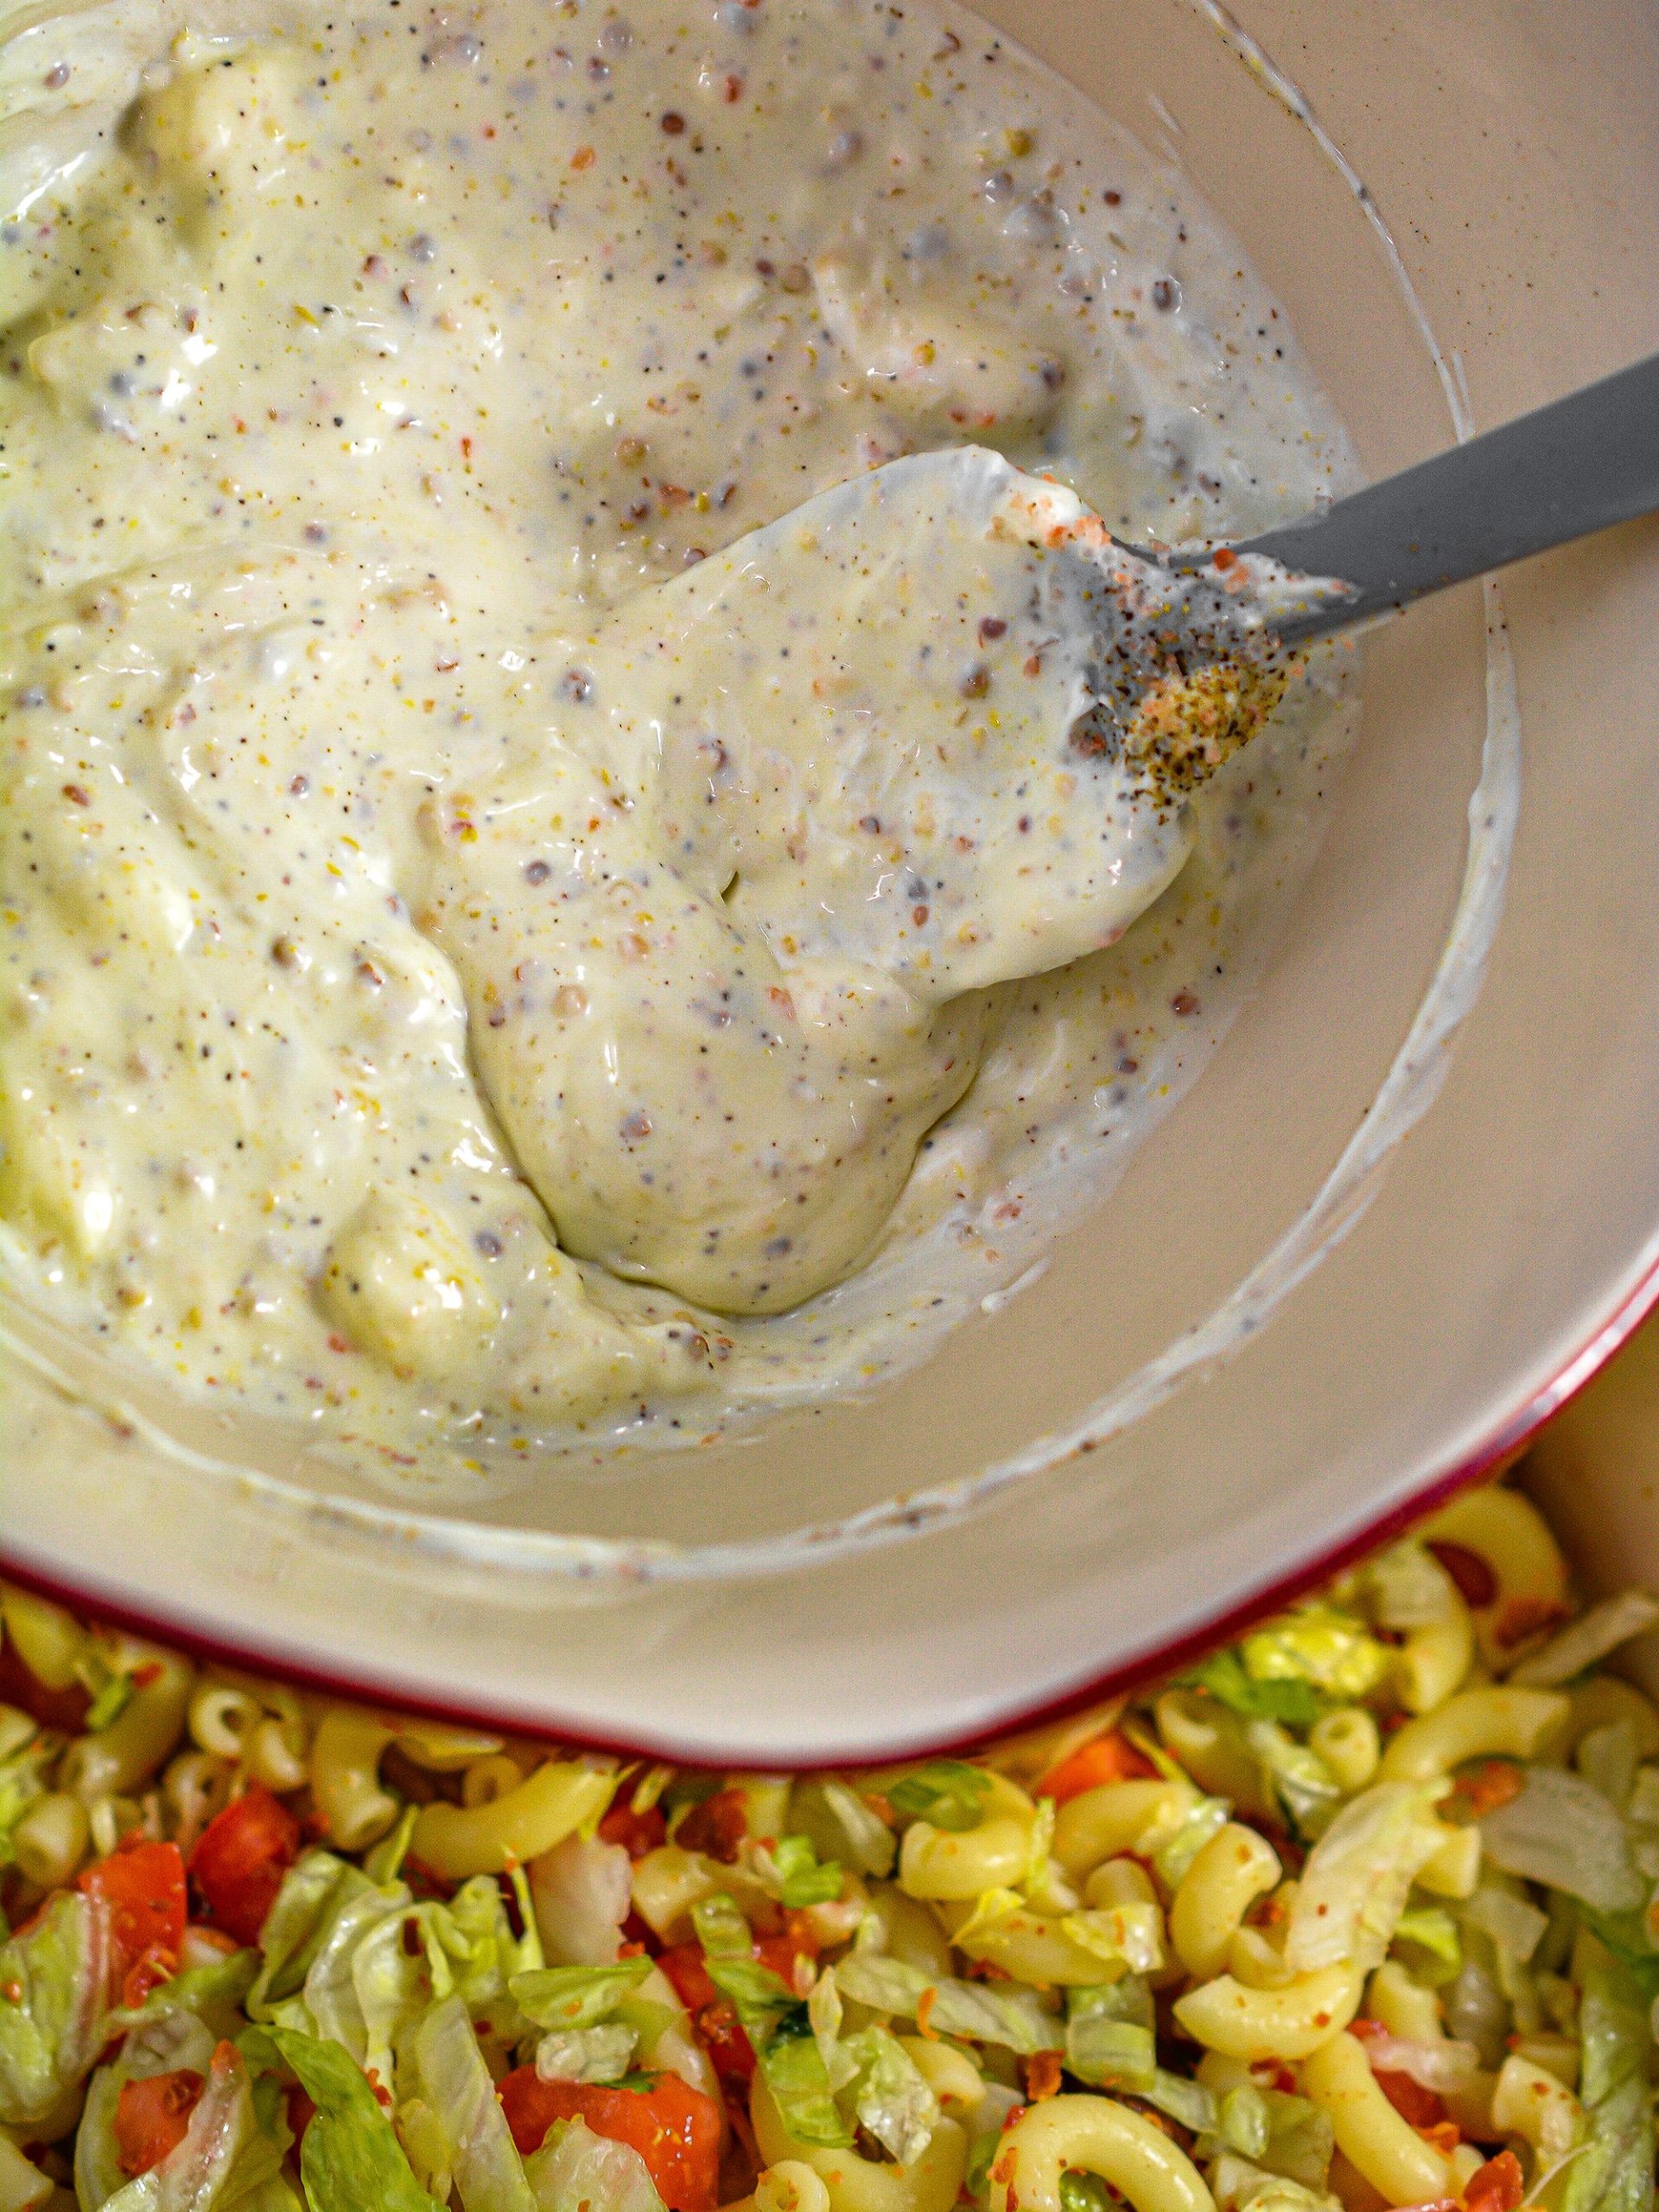 Mix together the mayo, mustard, sour cream and salt and pepper to taste in a small bowl.